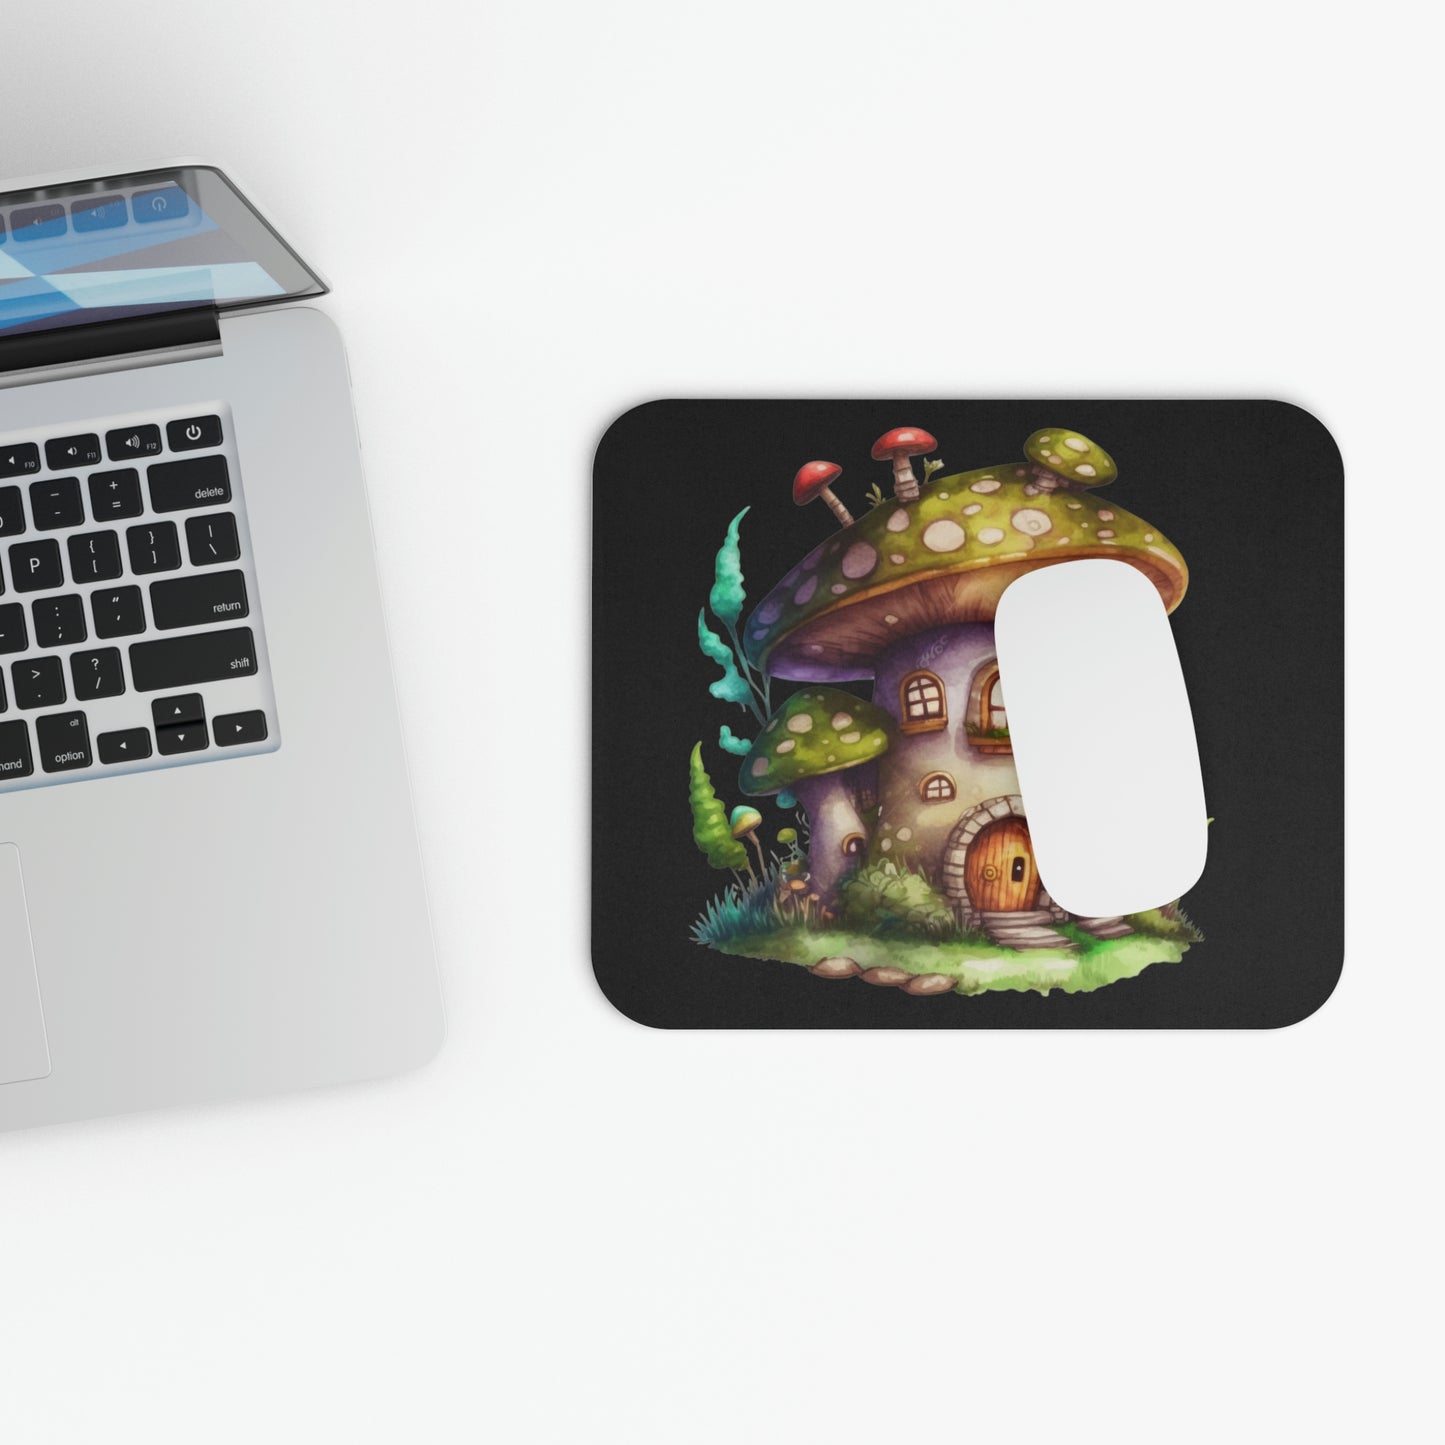 Mouse Pad Mushroom Mansion Mouse Pad (Rectangle)